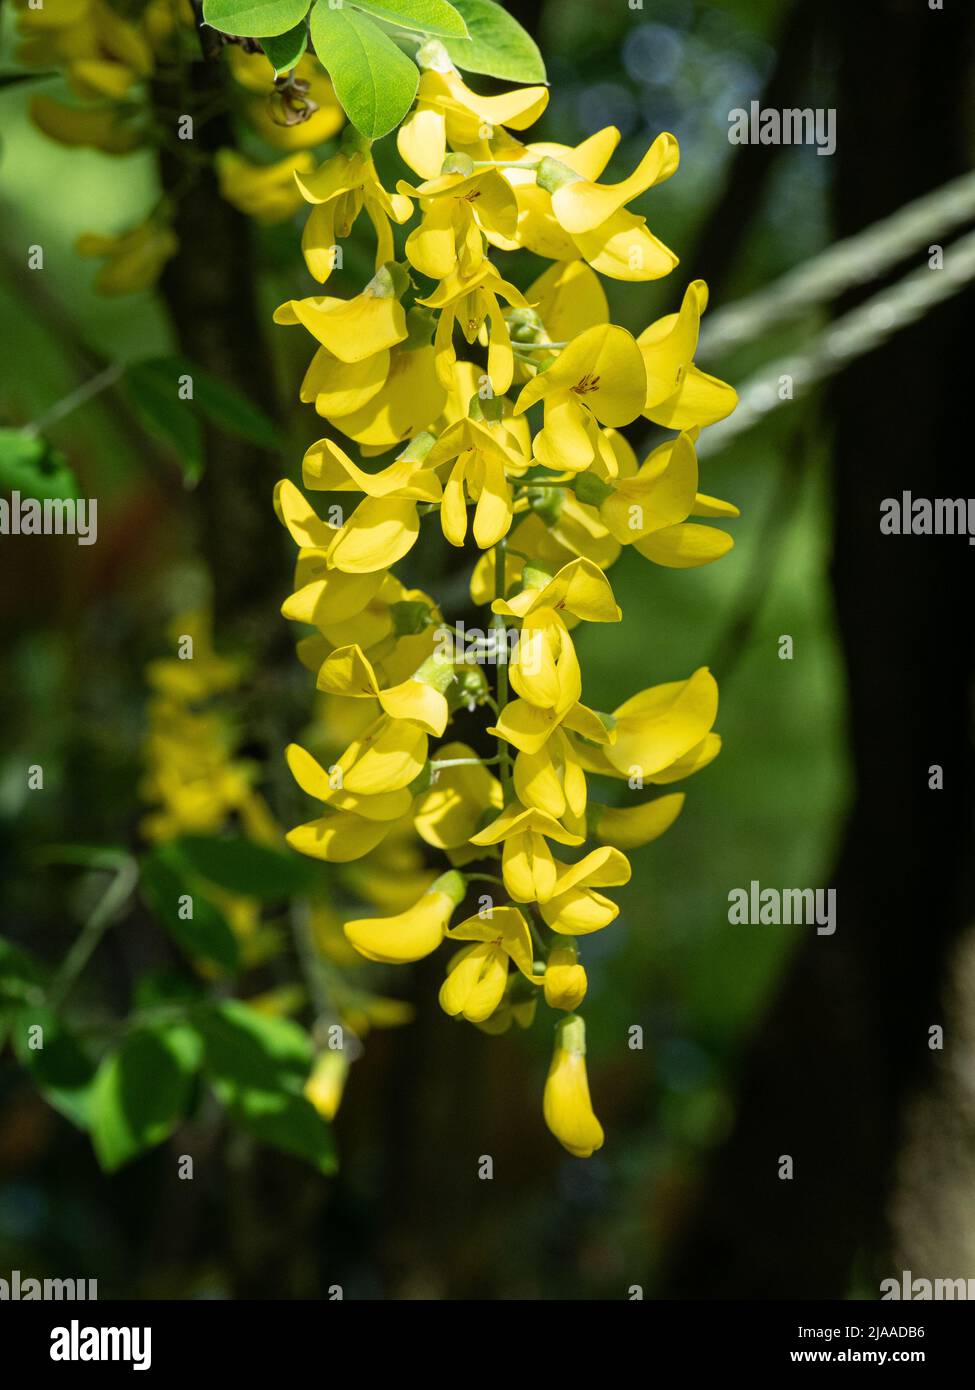 A close up of the bright yellow hanging flowers of the popular but poisonous Laburnum or Golden rain tree Stock Photo